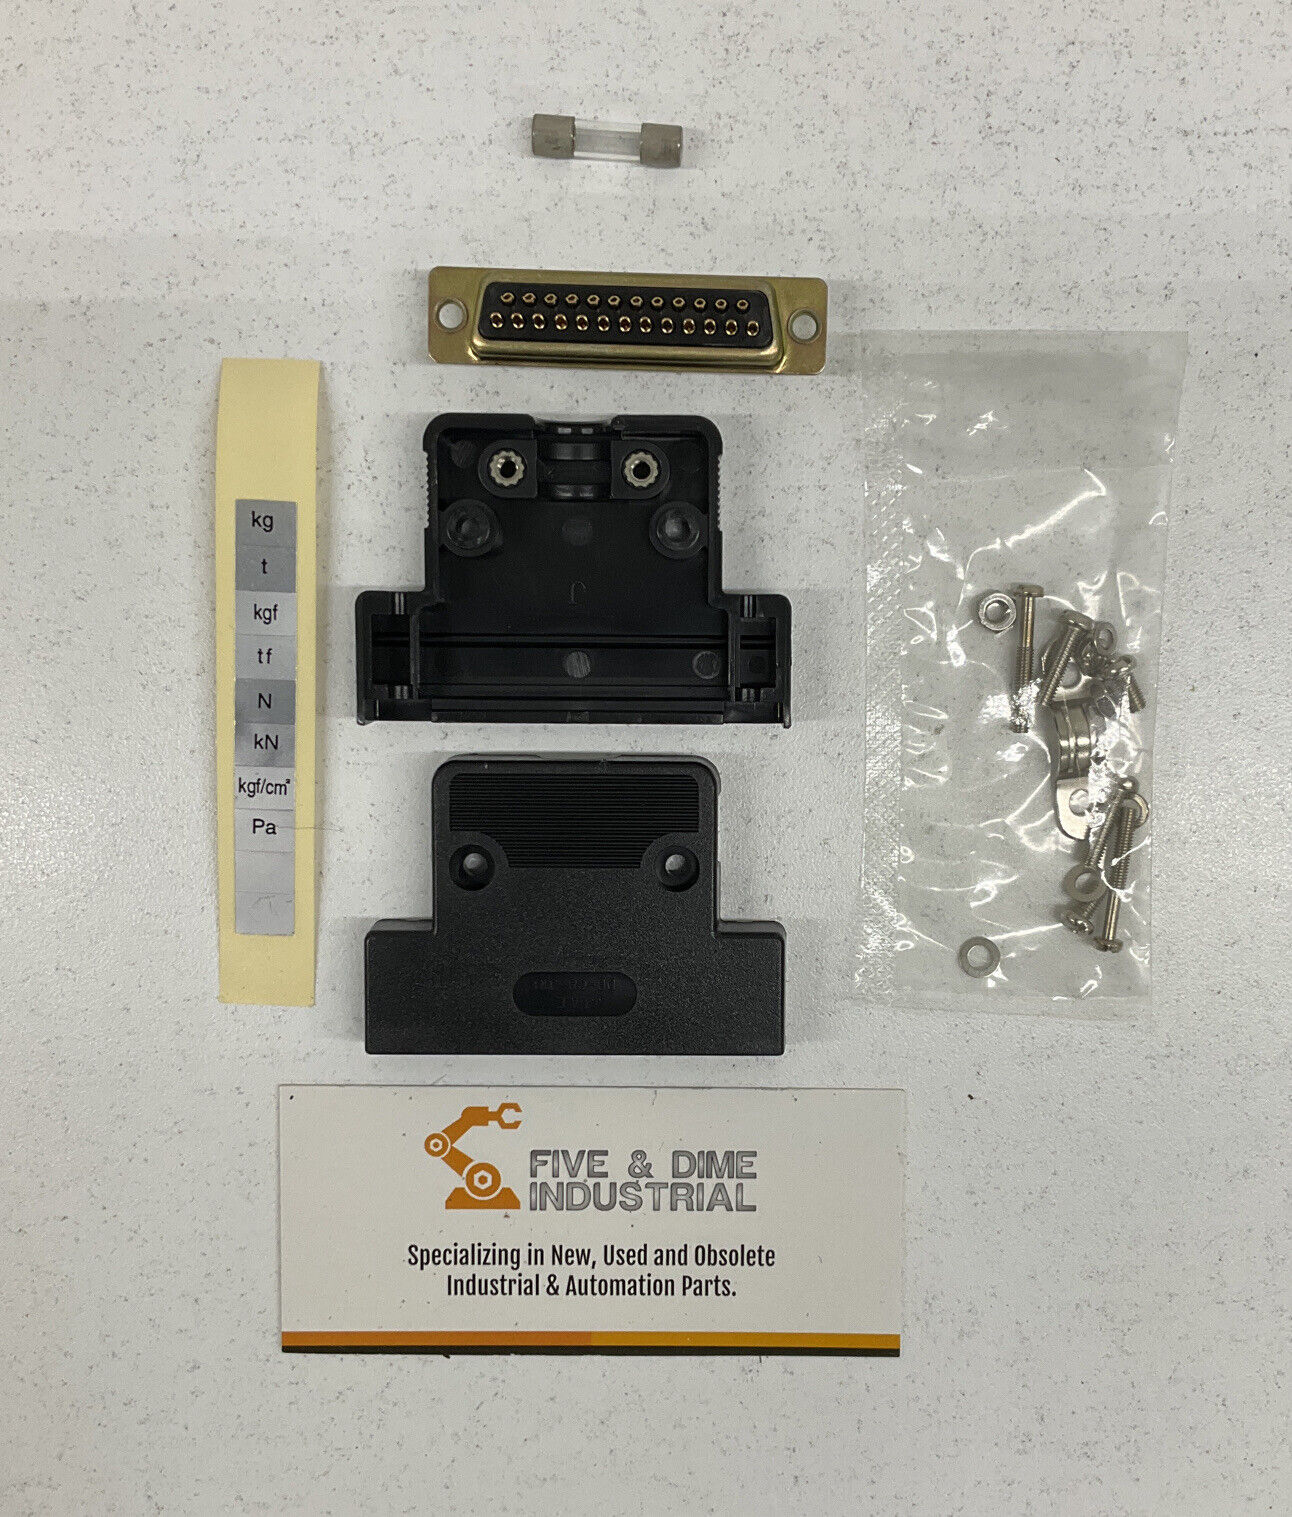 Minebea CSD-701-15  Replacement Parts for Digital Indicator - BL185